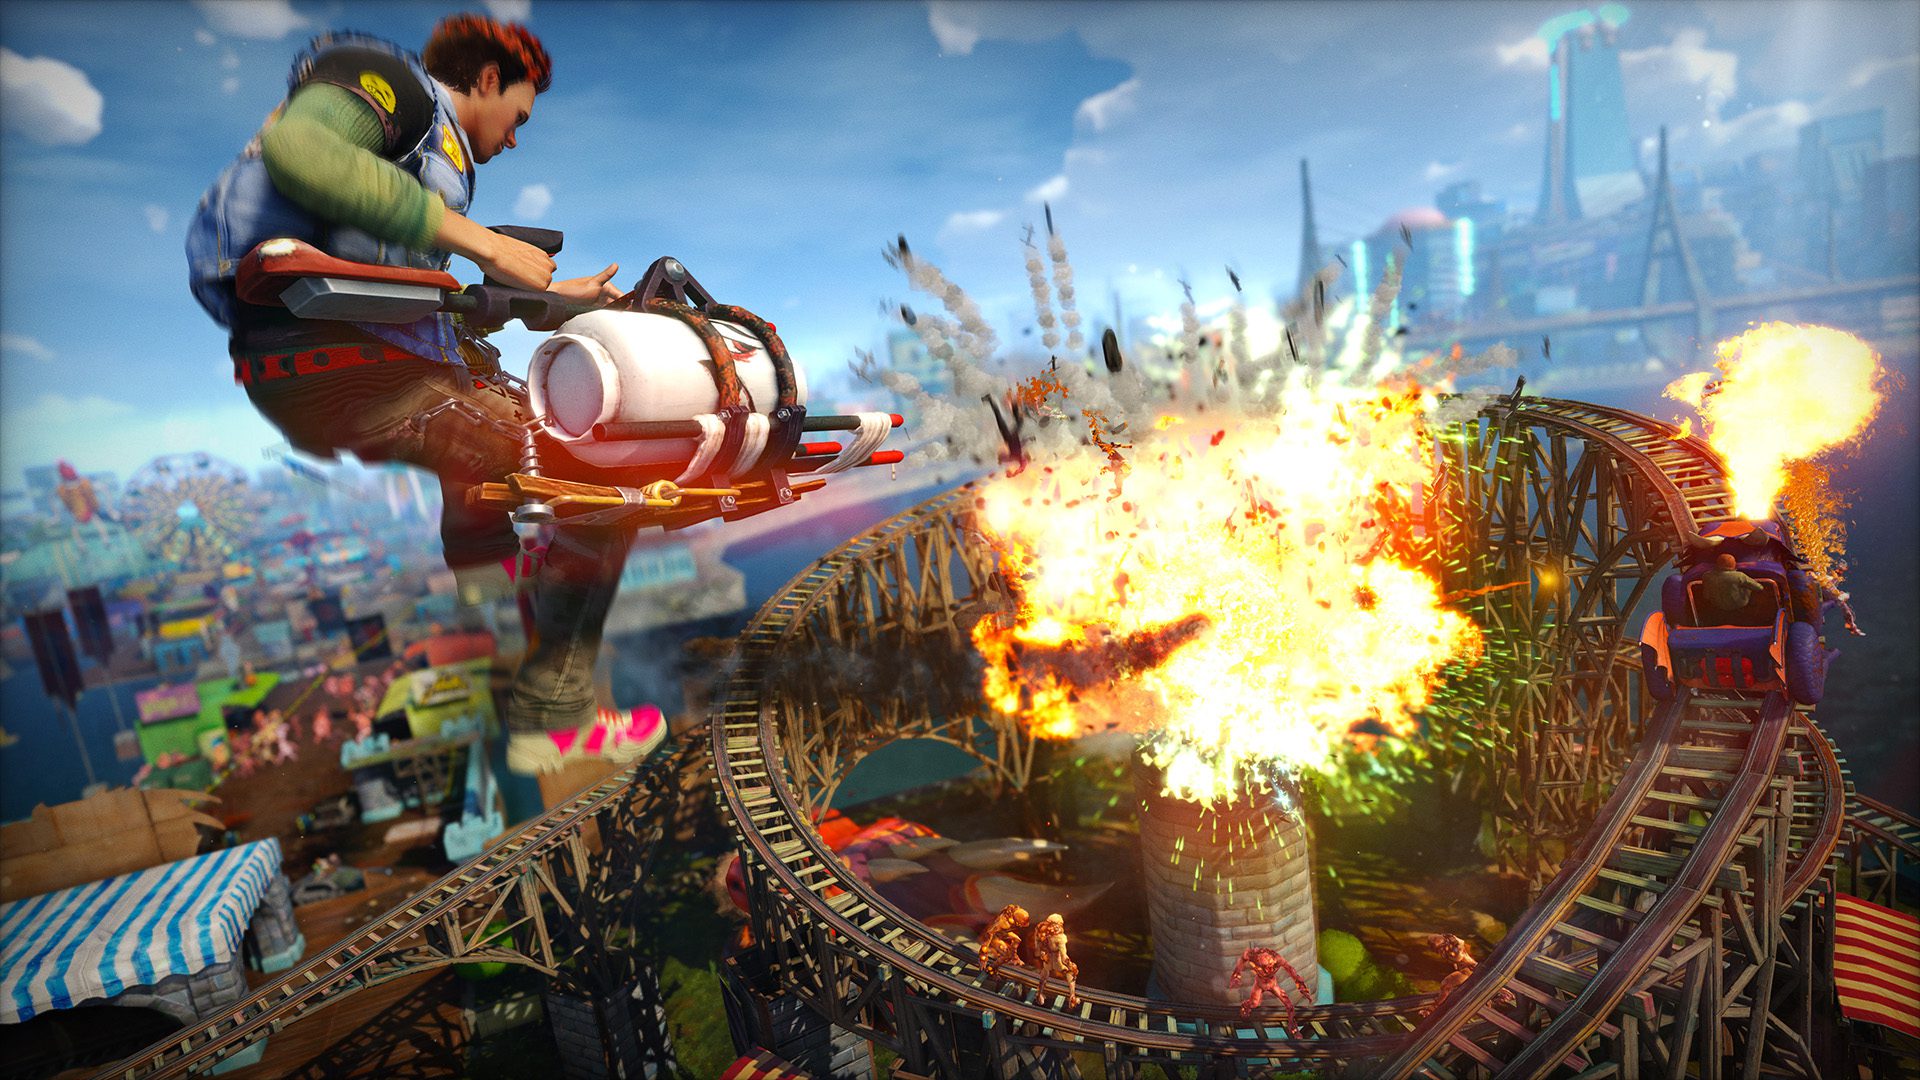 Sunset Overdrive comes to PC along with a physical edition!